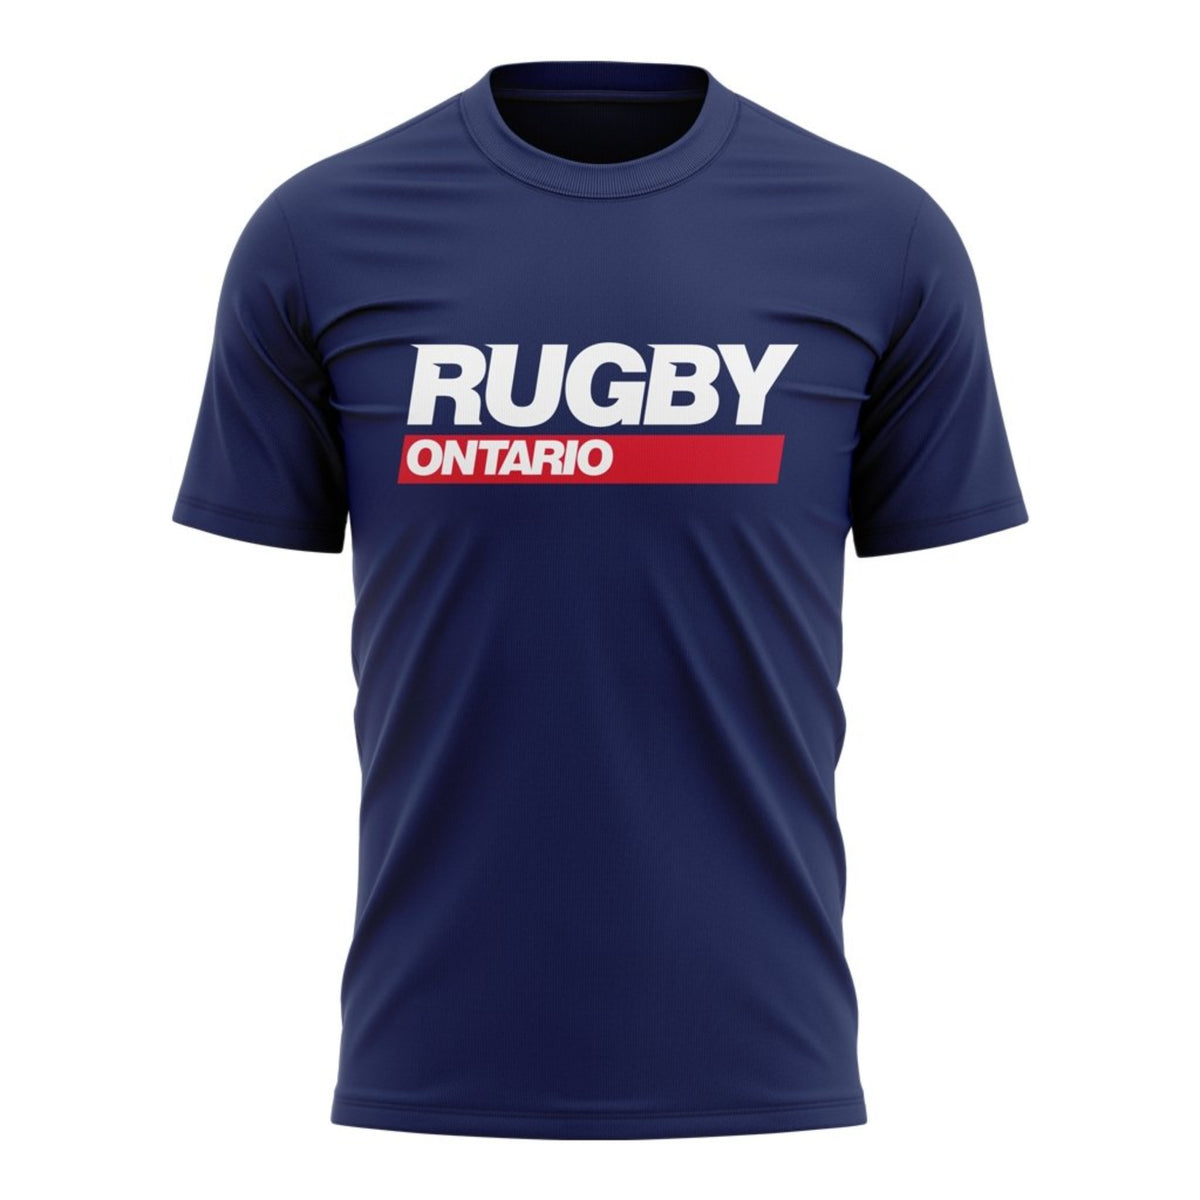 Rugby Ontario &quot;Statement&quot; Tee - Youth - www.therugbyshop.com www.therugbyshop.com YOUTH / NAVY / XS XIX Brands TEES Rugby Ontario &quot;Statement&quot; Tee - Youth